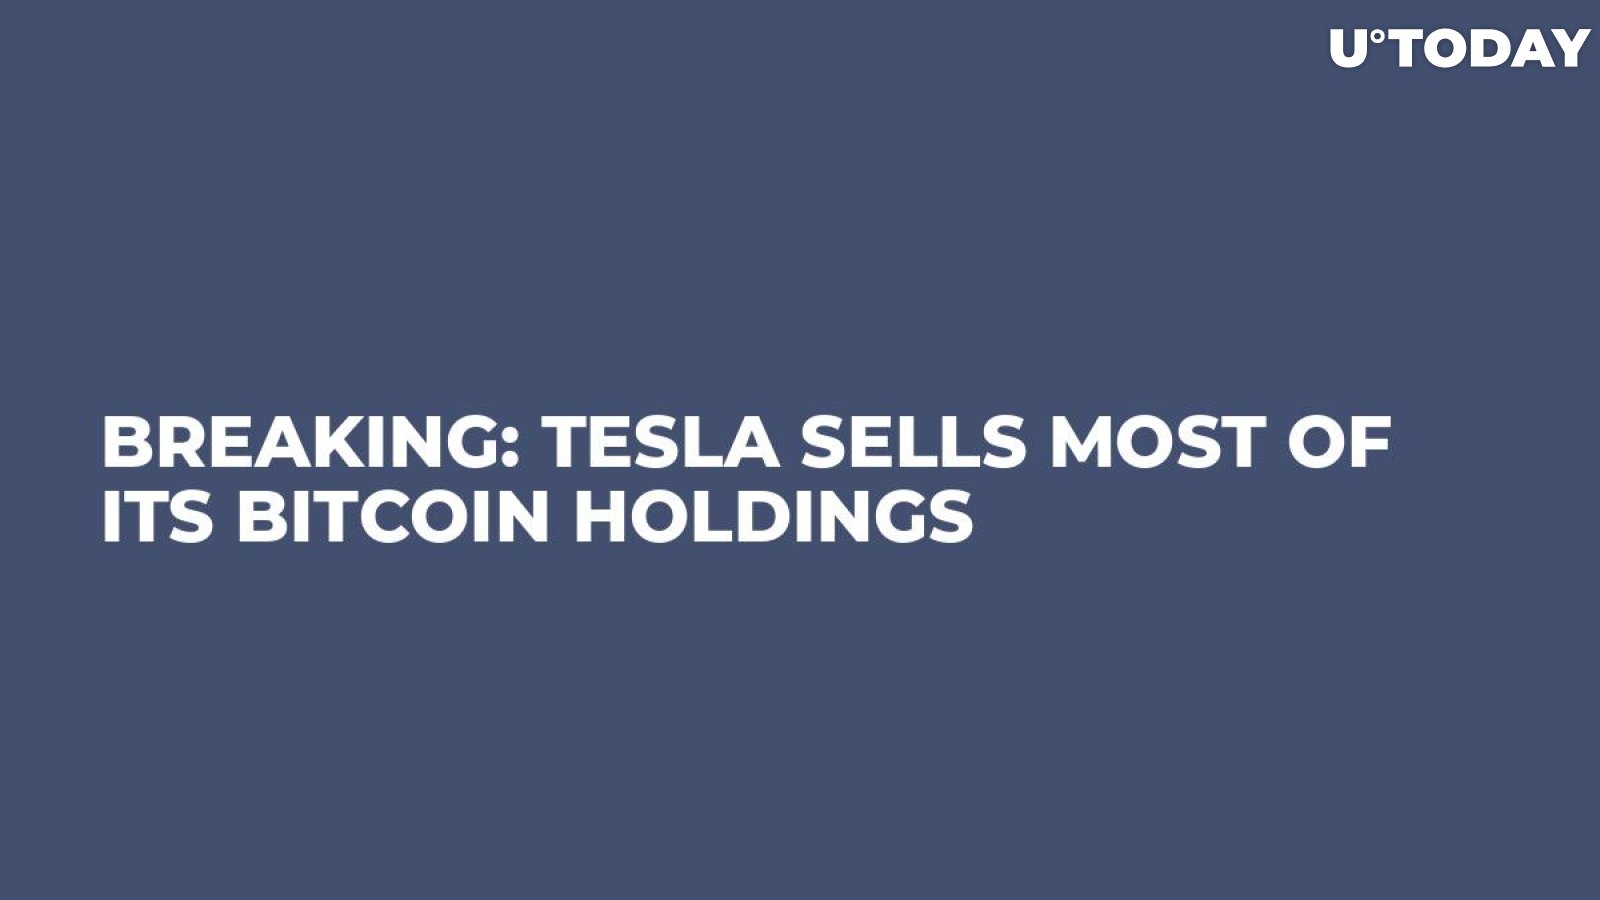 BREAKING: Tesla Sells Most of Its Bitcoin Holdings